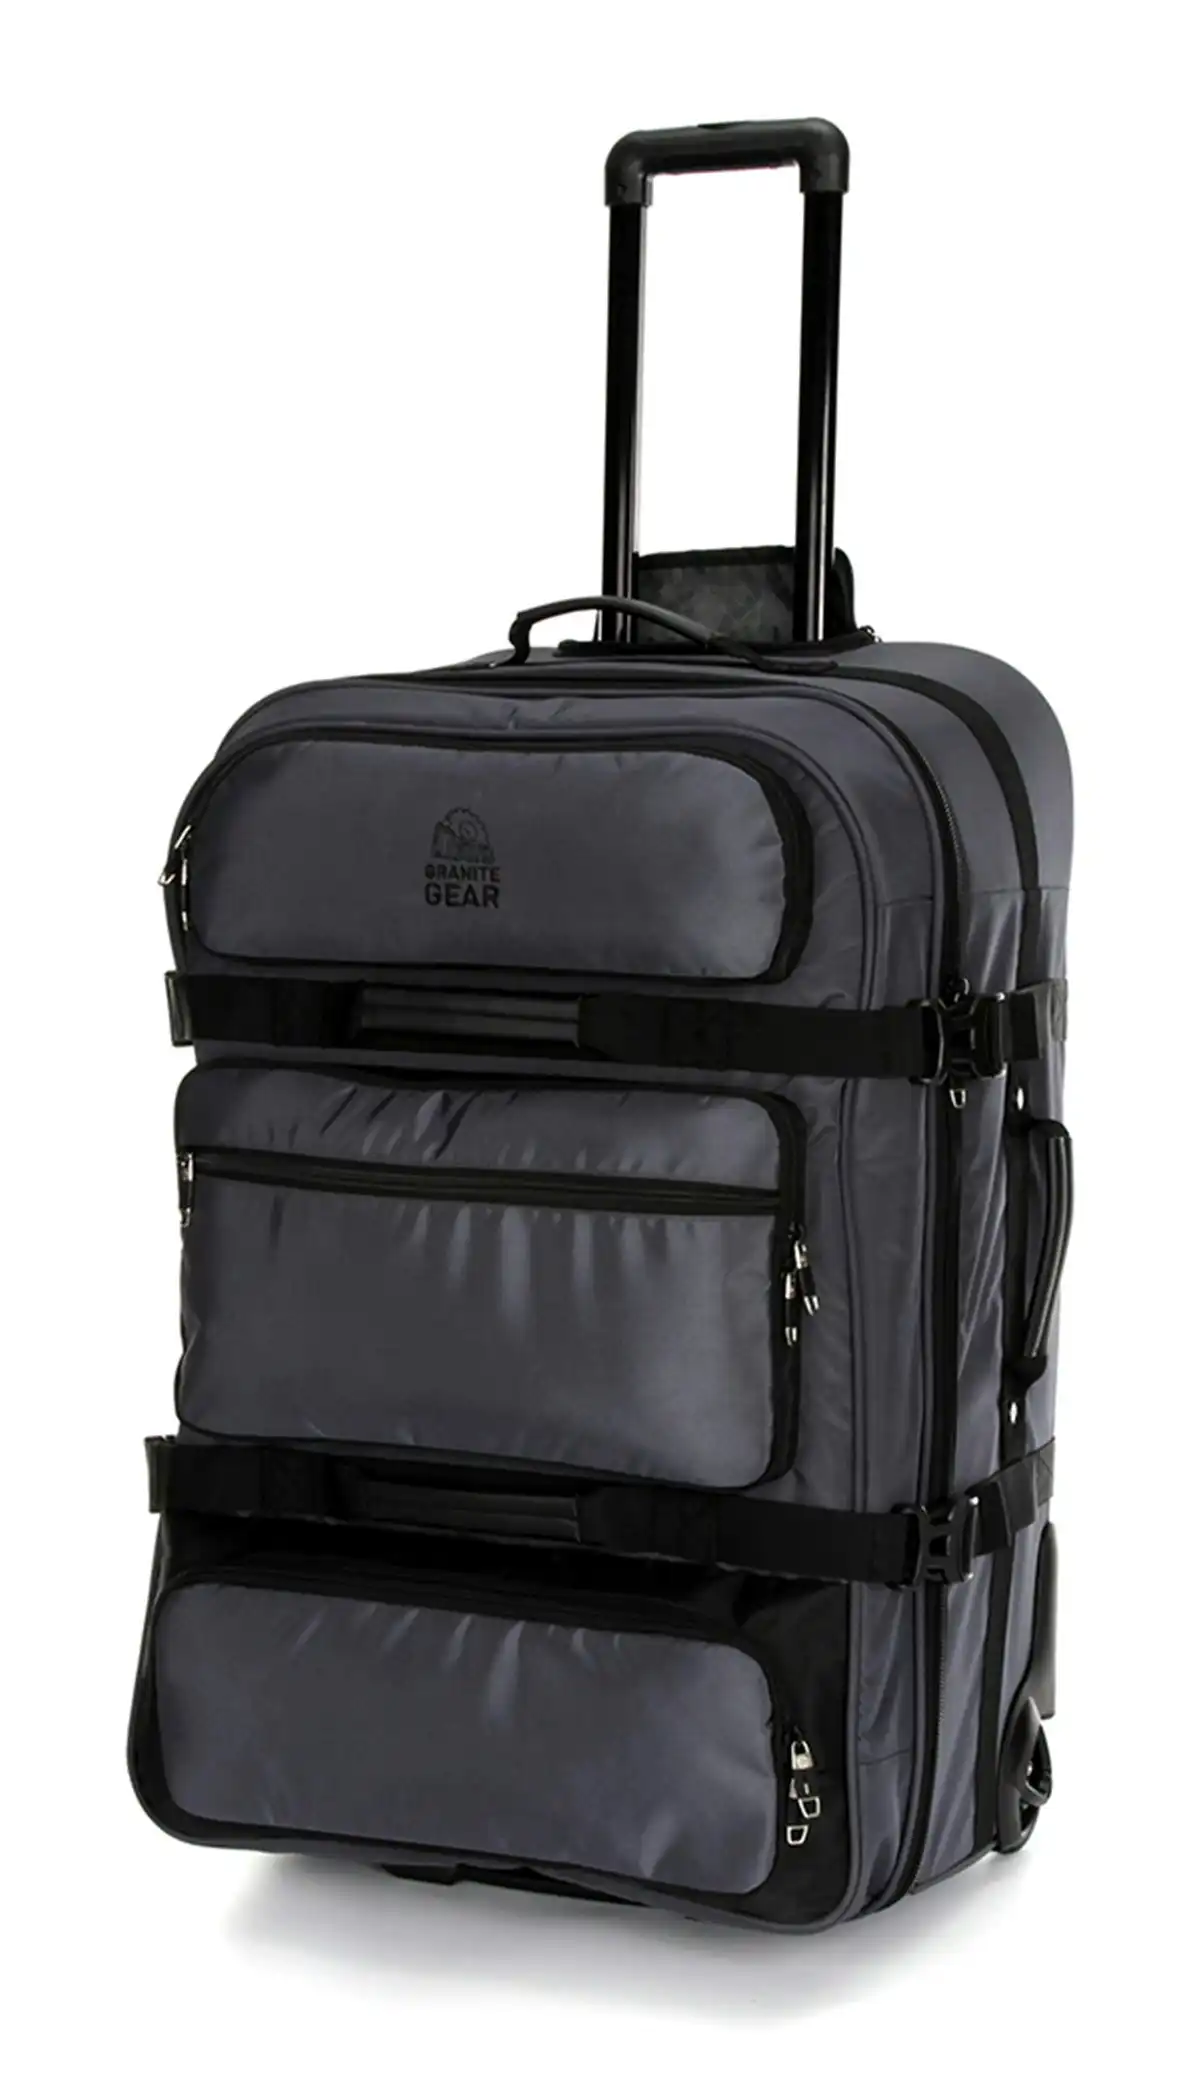 Granite Gear Luggage Wheeled Duffle Lightweight With Wheel SofeCase Check In Large Travel Suitcase G8500C